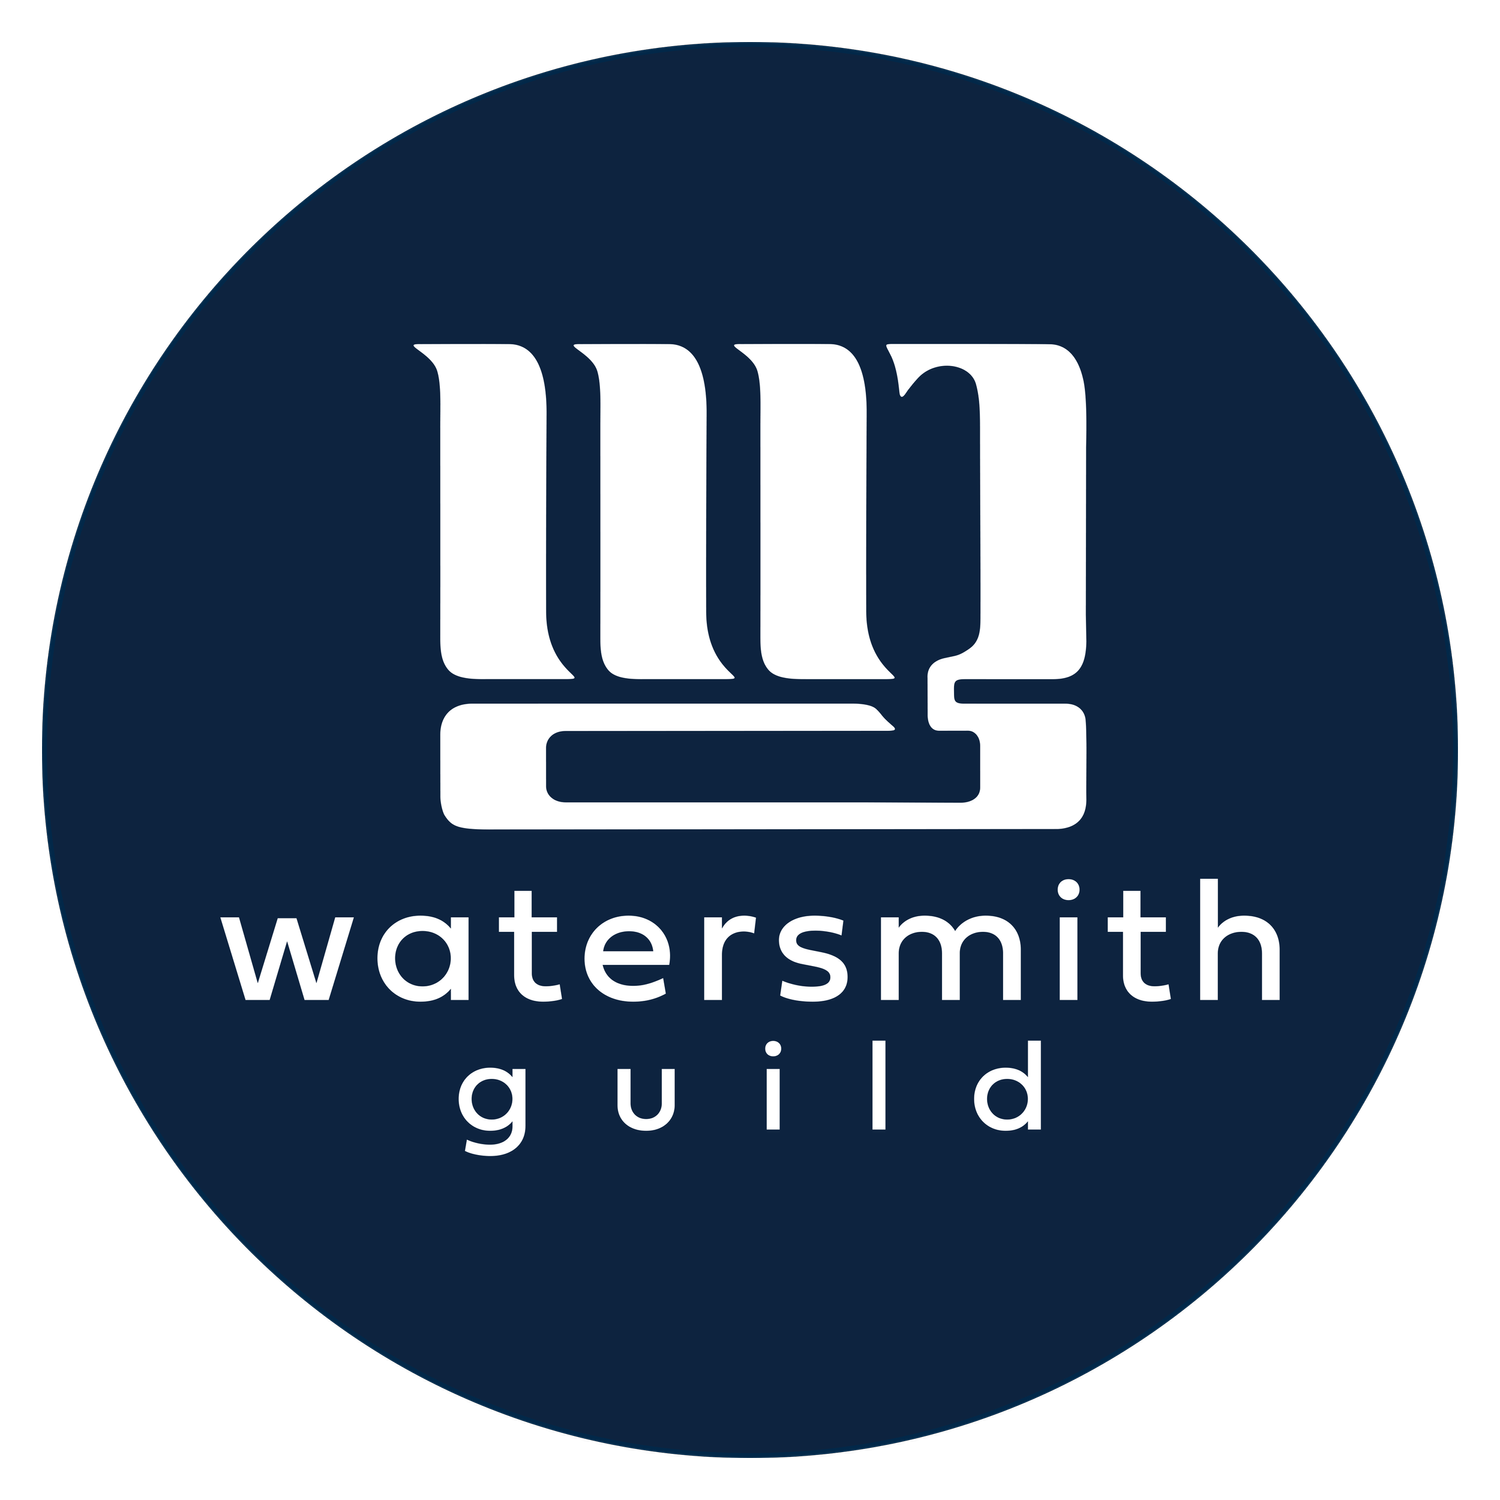 The Watersmith Guild